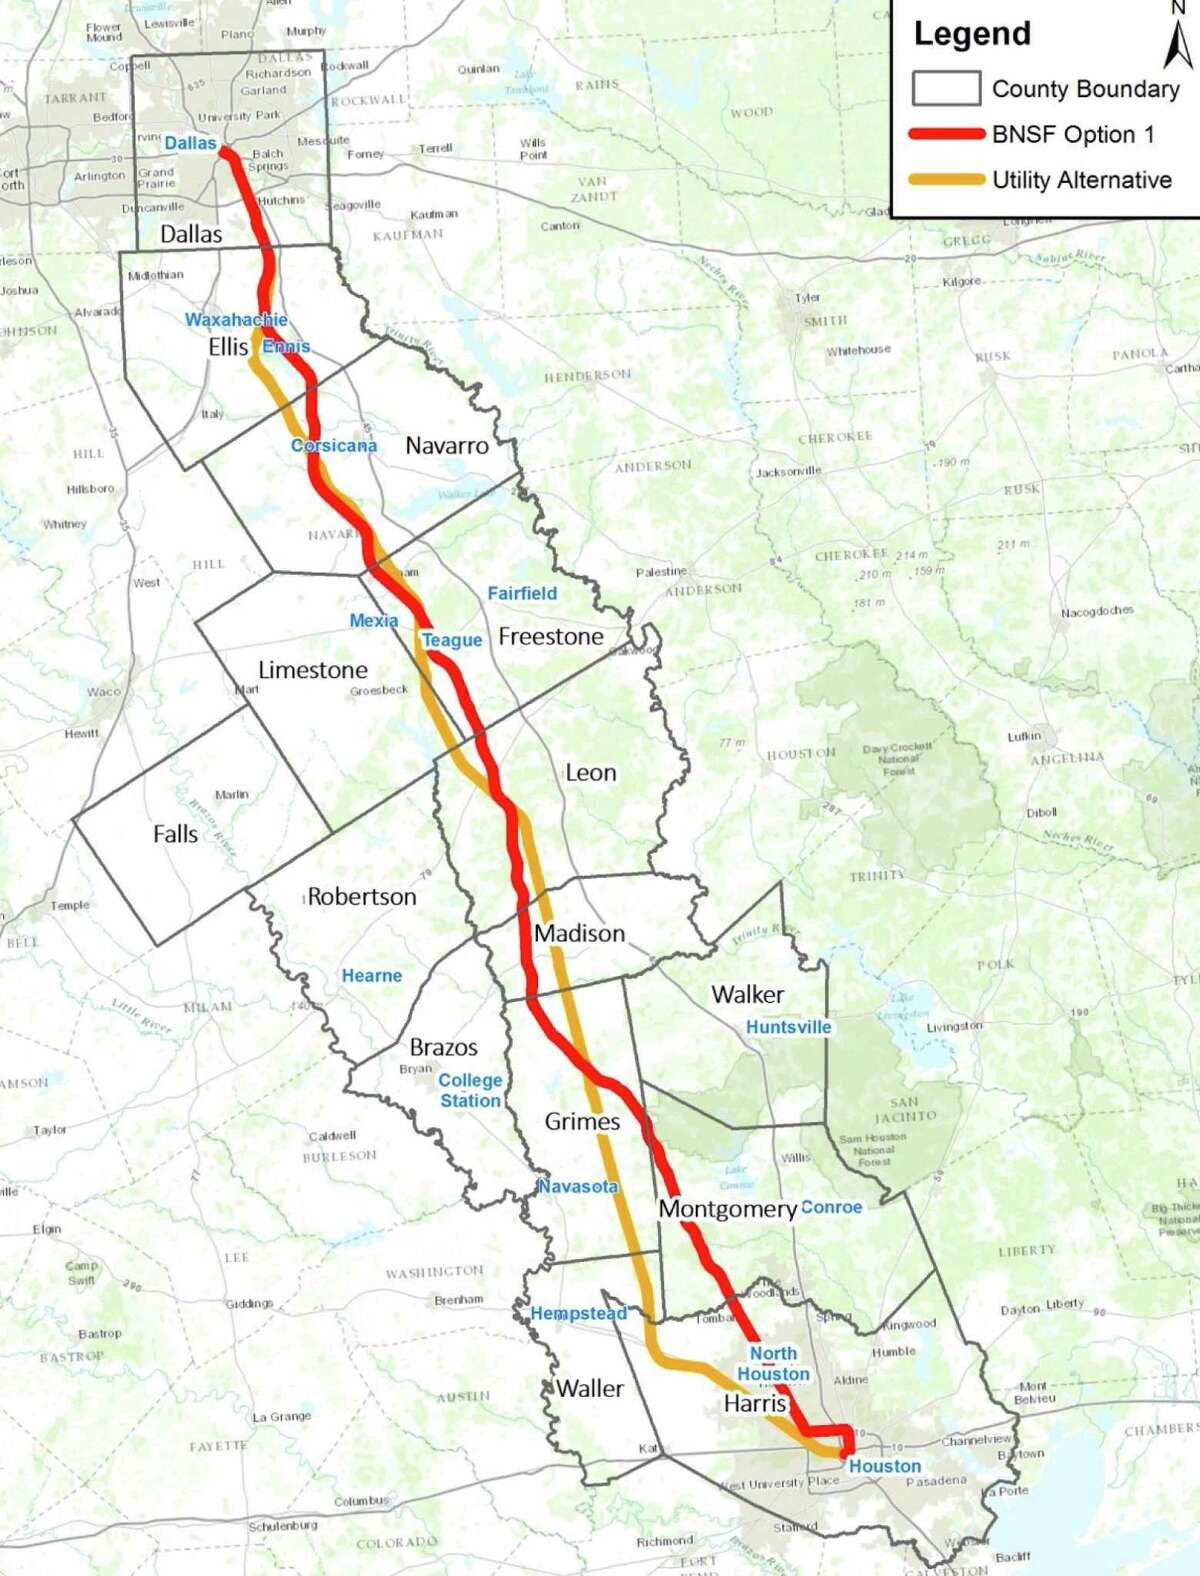 The proposed routes for the Texas Central High-Speed Railway.